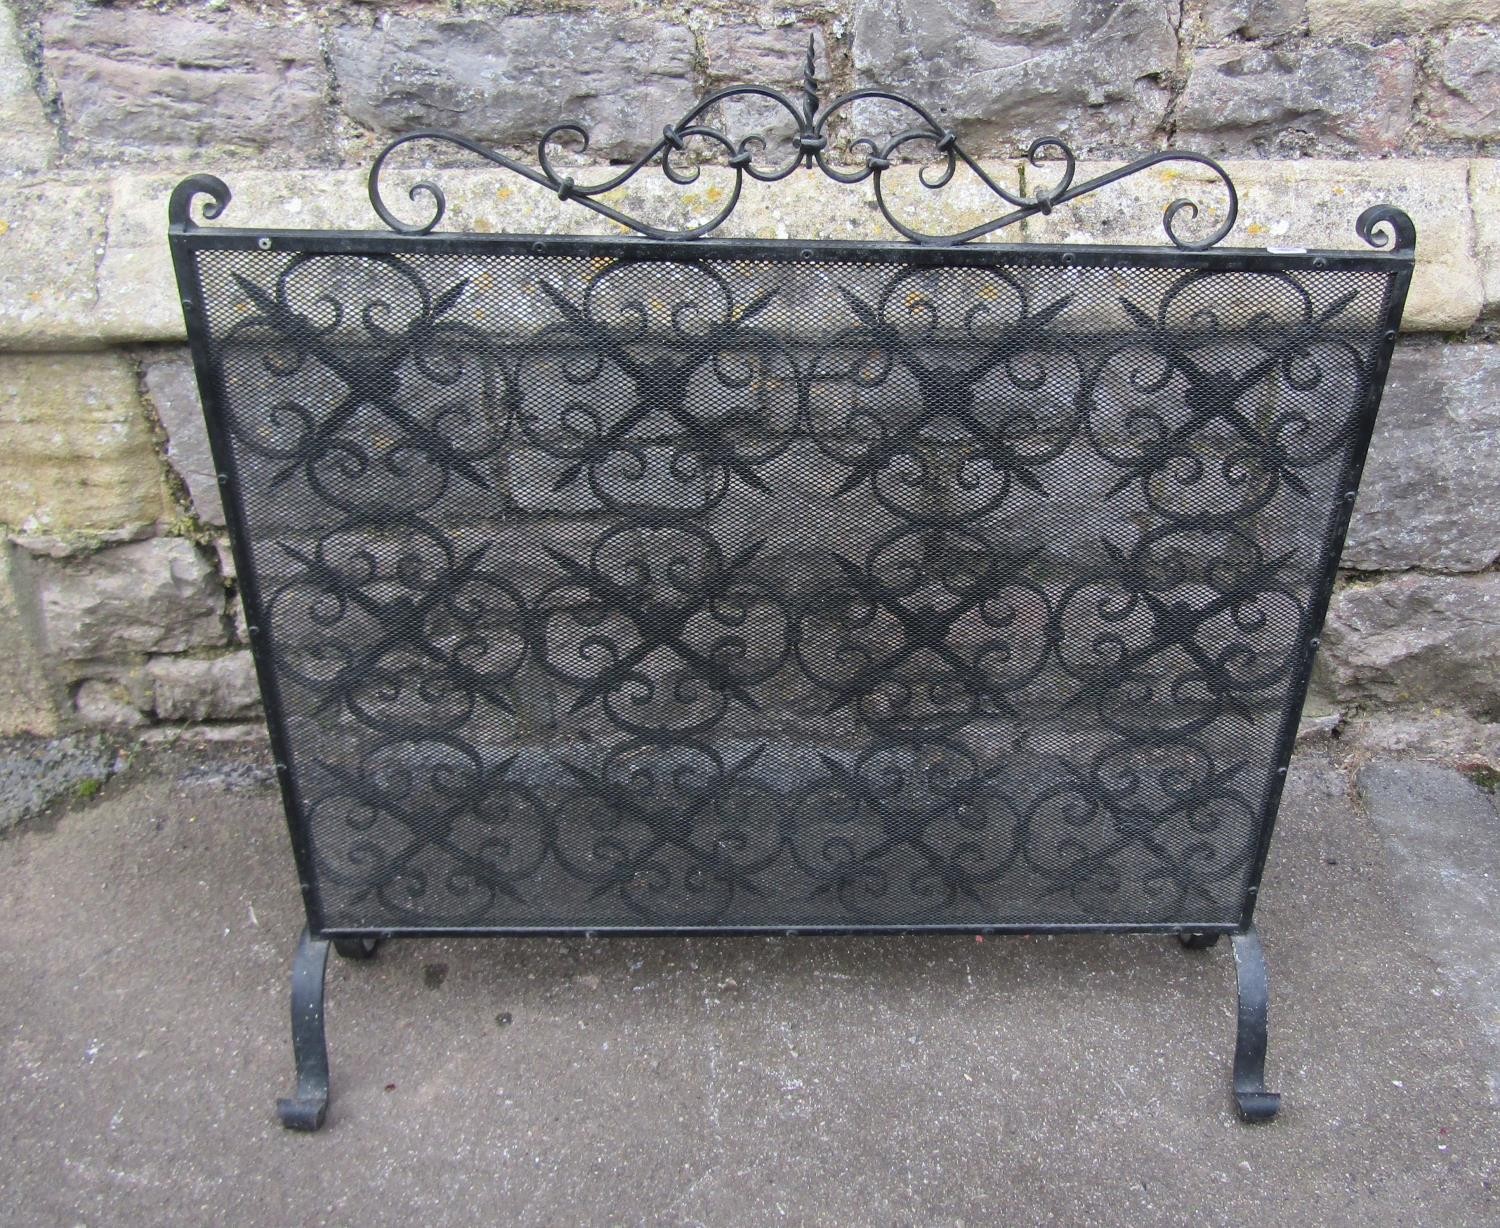 A heavy gauge decorative iron work fire guard, 83 cm (full height) x 82 cm full width - Image 3 of 3